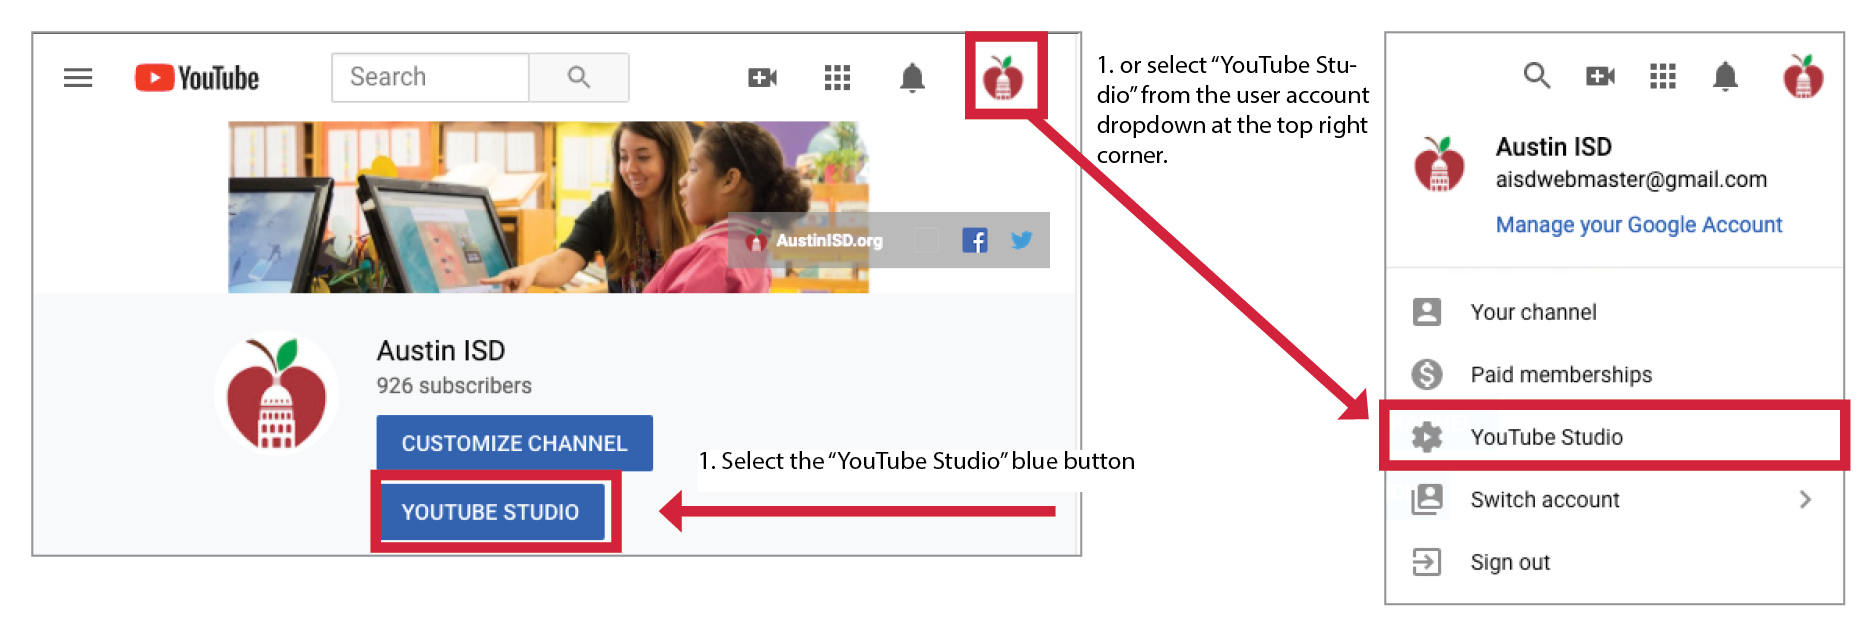 YouTube Studio button location and menu dropdown at top right corner of screen